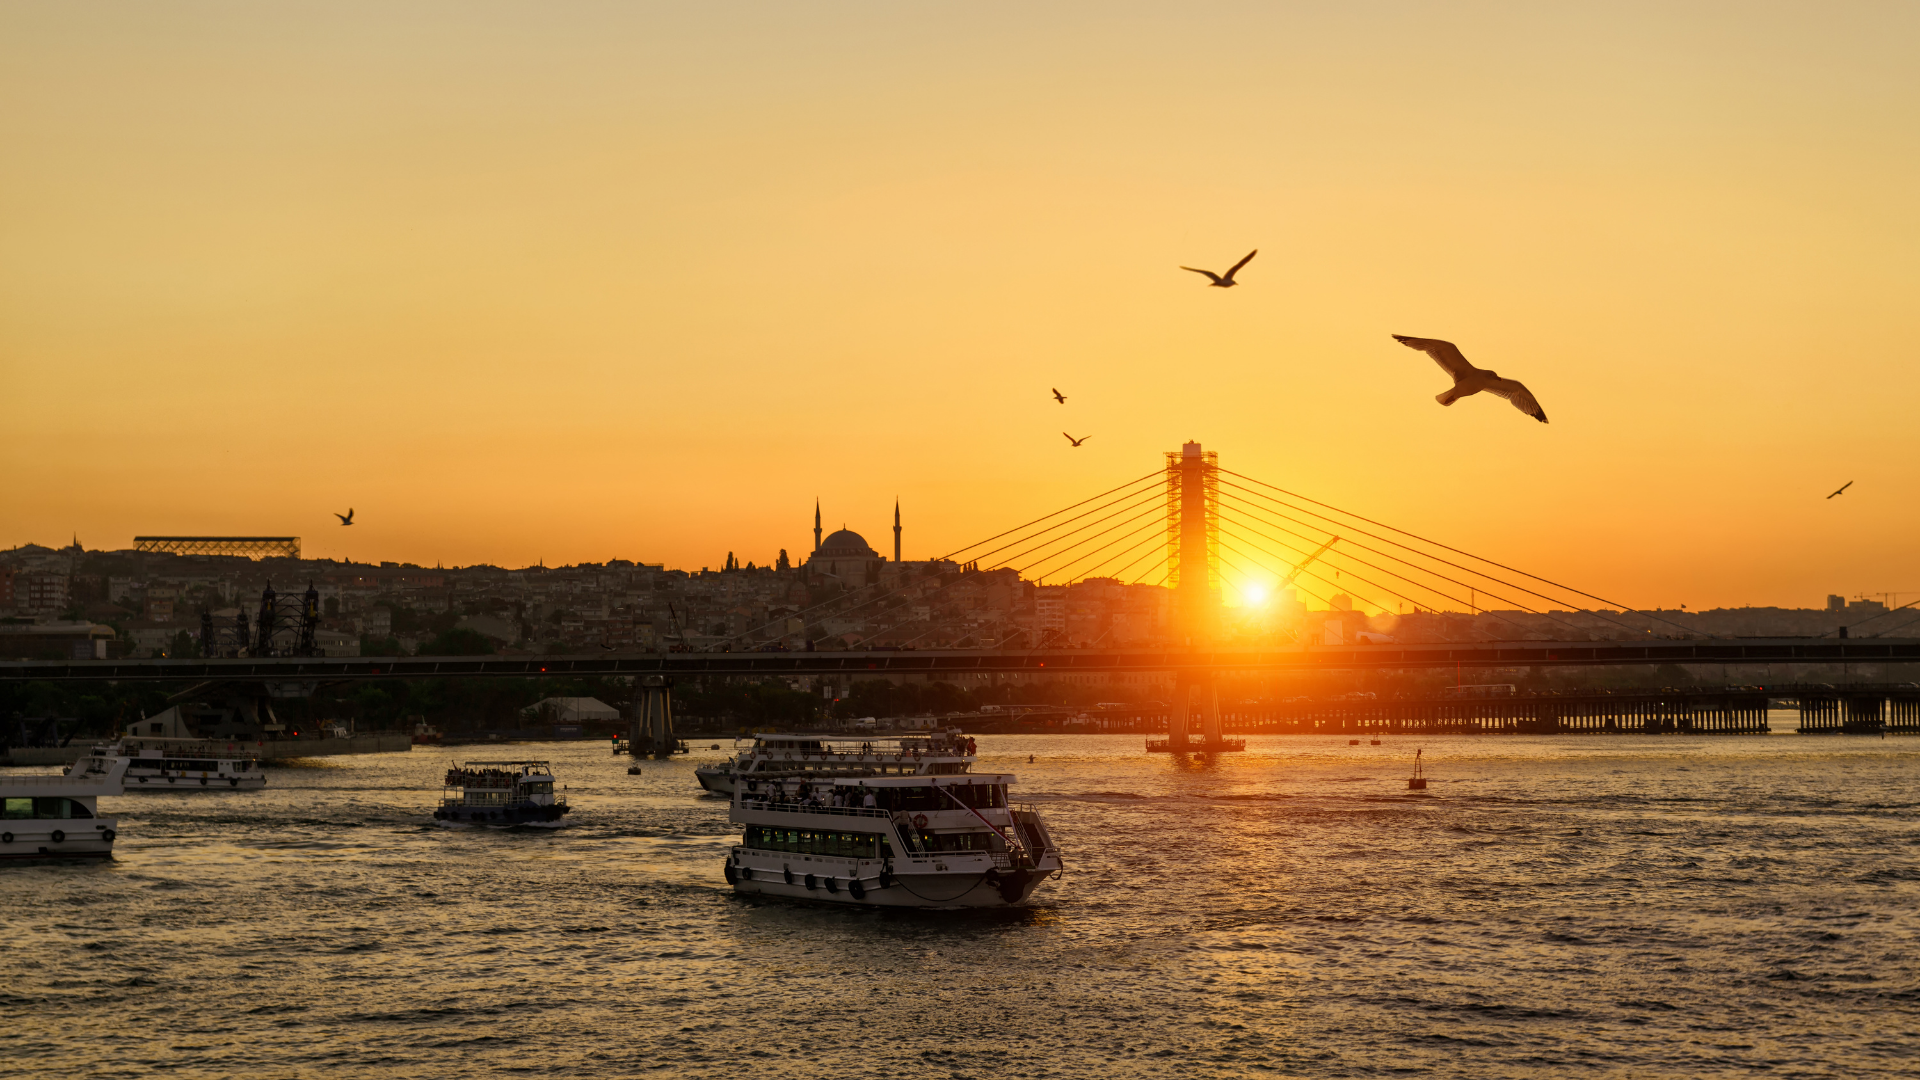 Sunset photography workshop on a yacht in Istanbul.